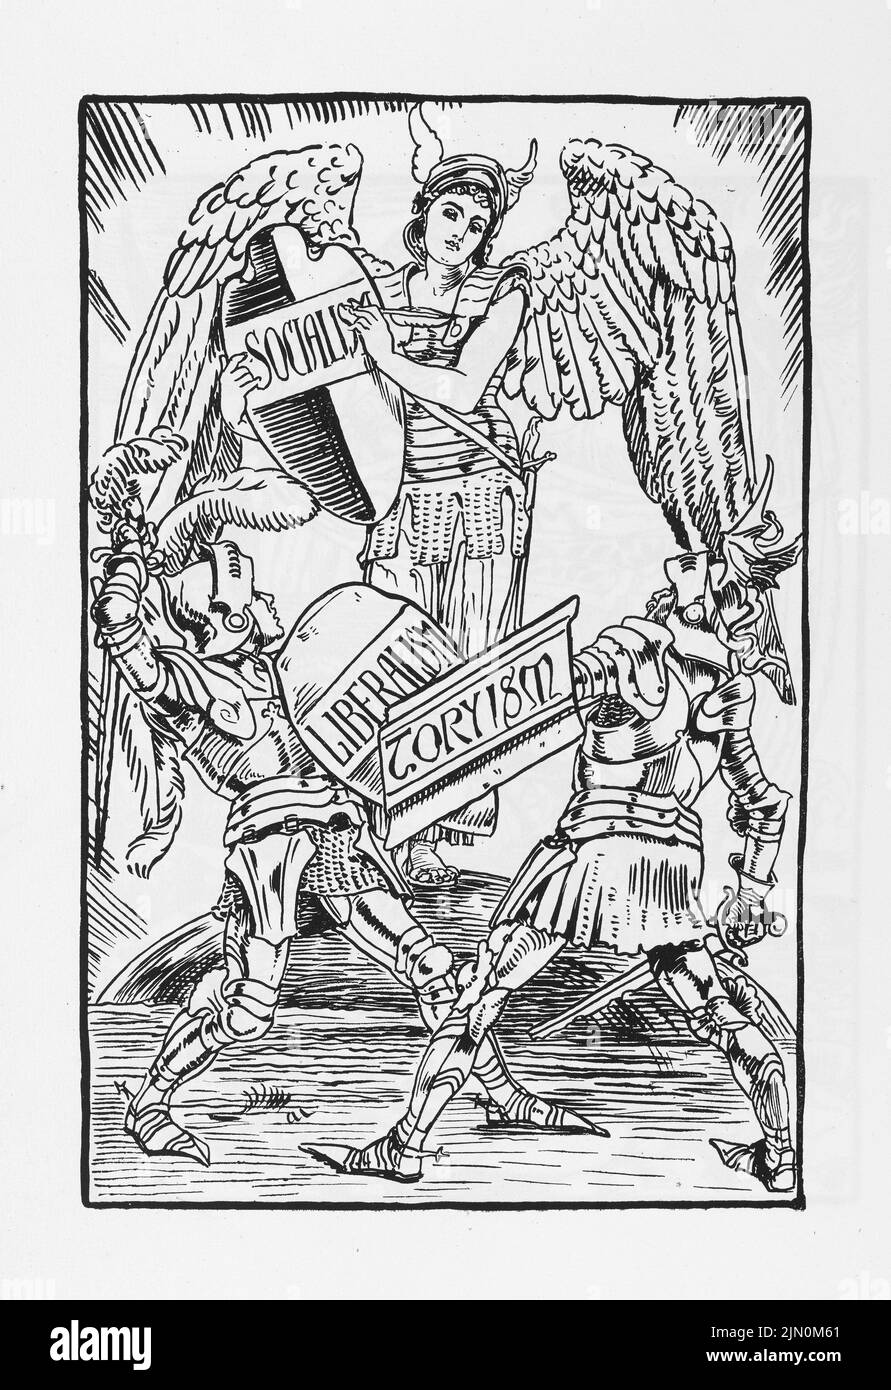 Socialism illustration by Walter Crane from Cartoons for the Cause 1886-1896, International Socialist Workers. Stock Photo